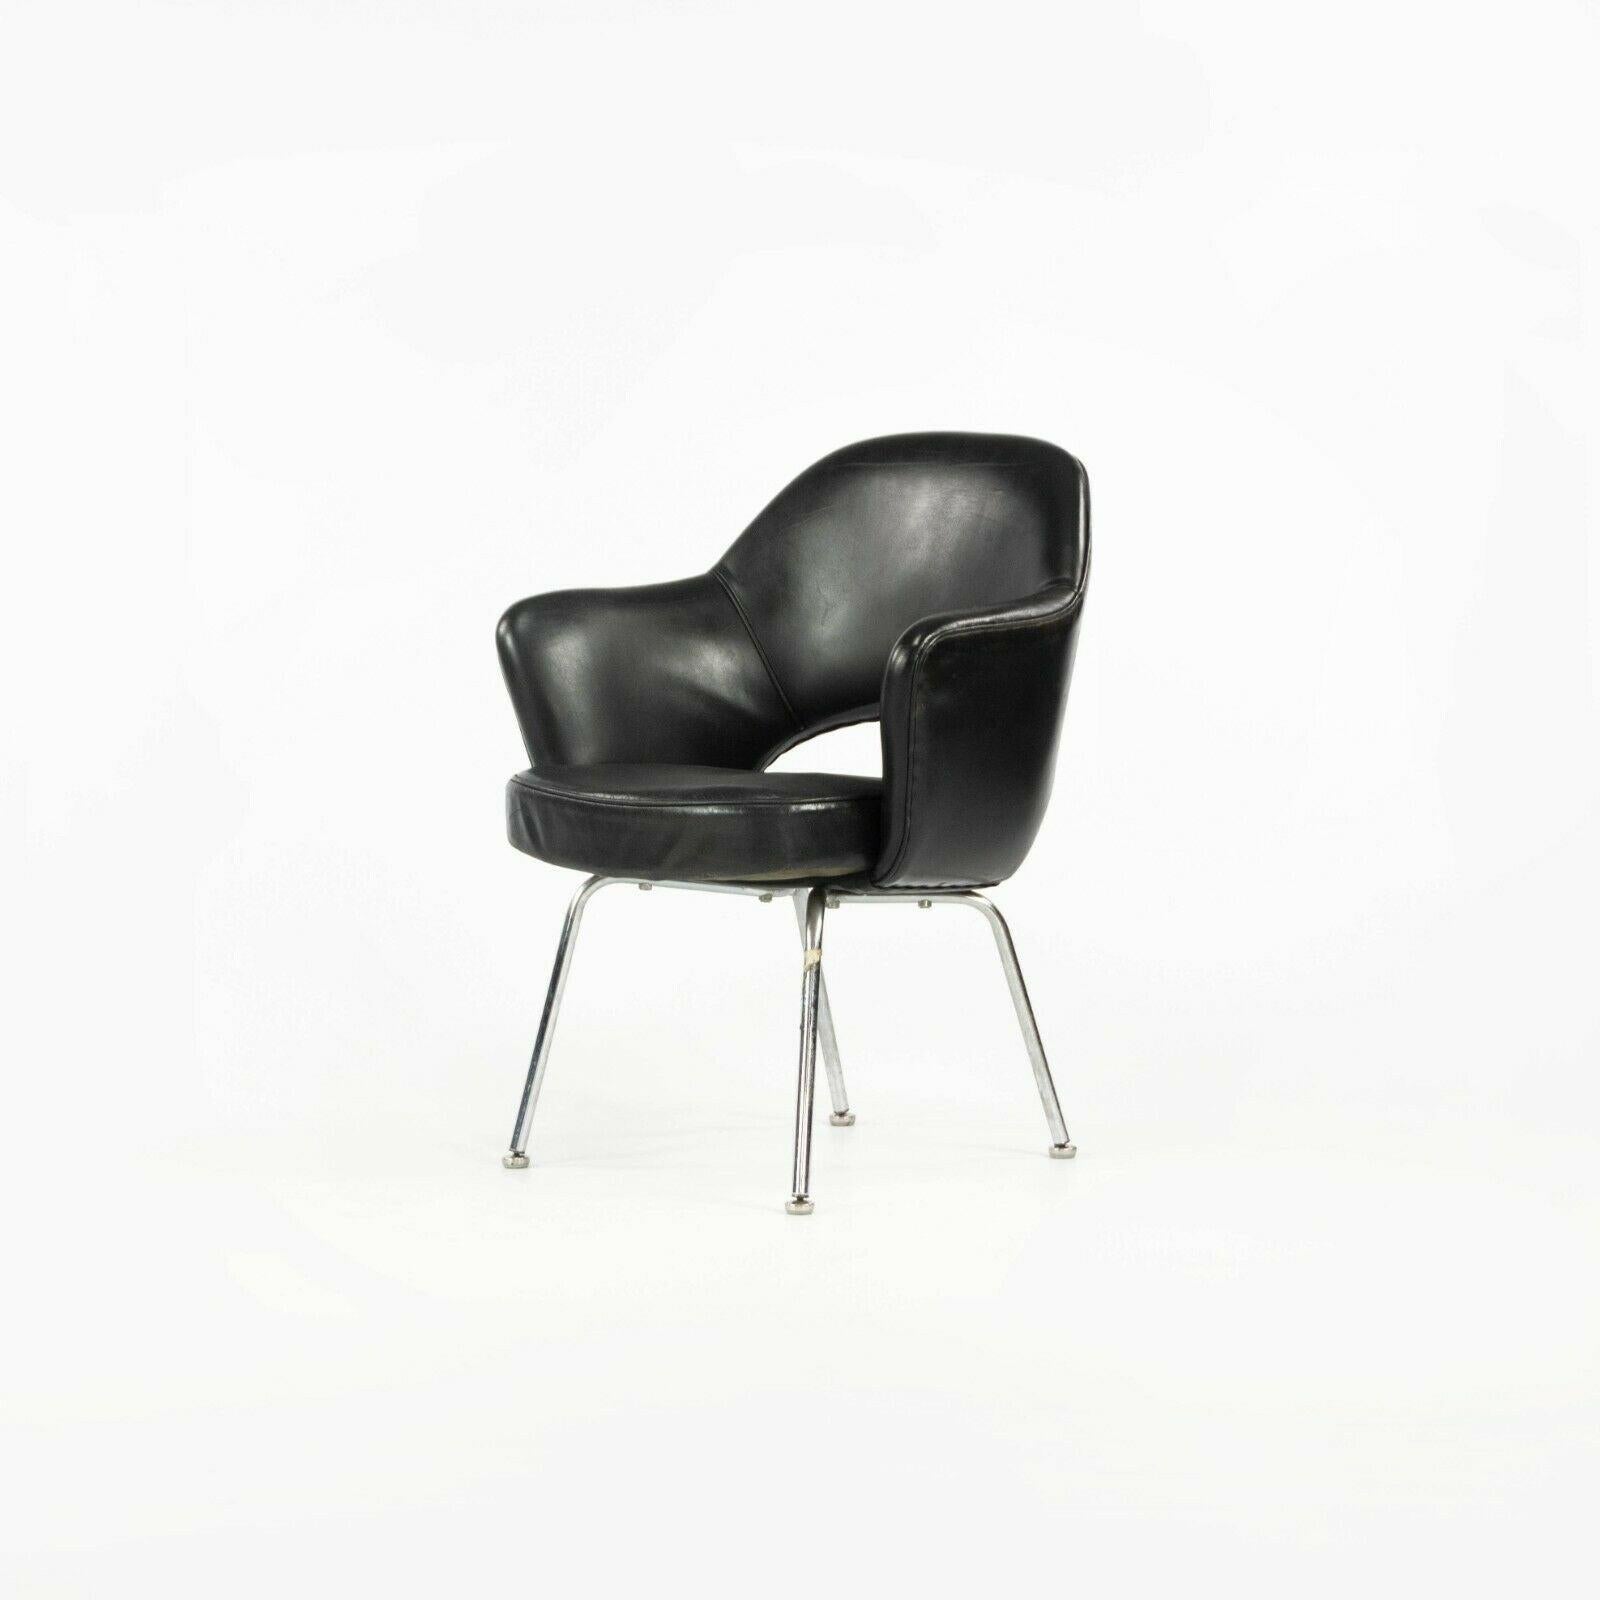 1960s Eero Saarinen for Knoll Executive Dining Arm Chair in Black Leather For Sale 2